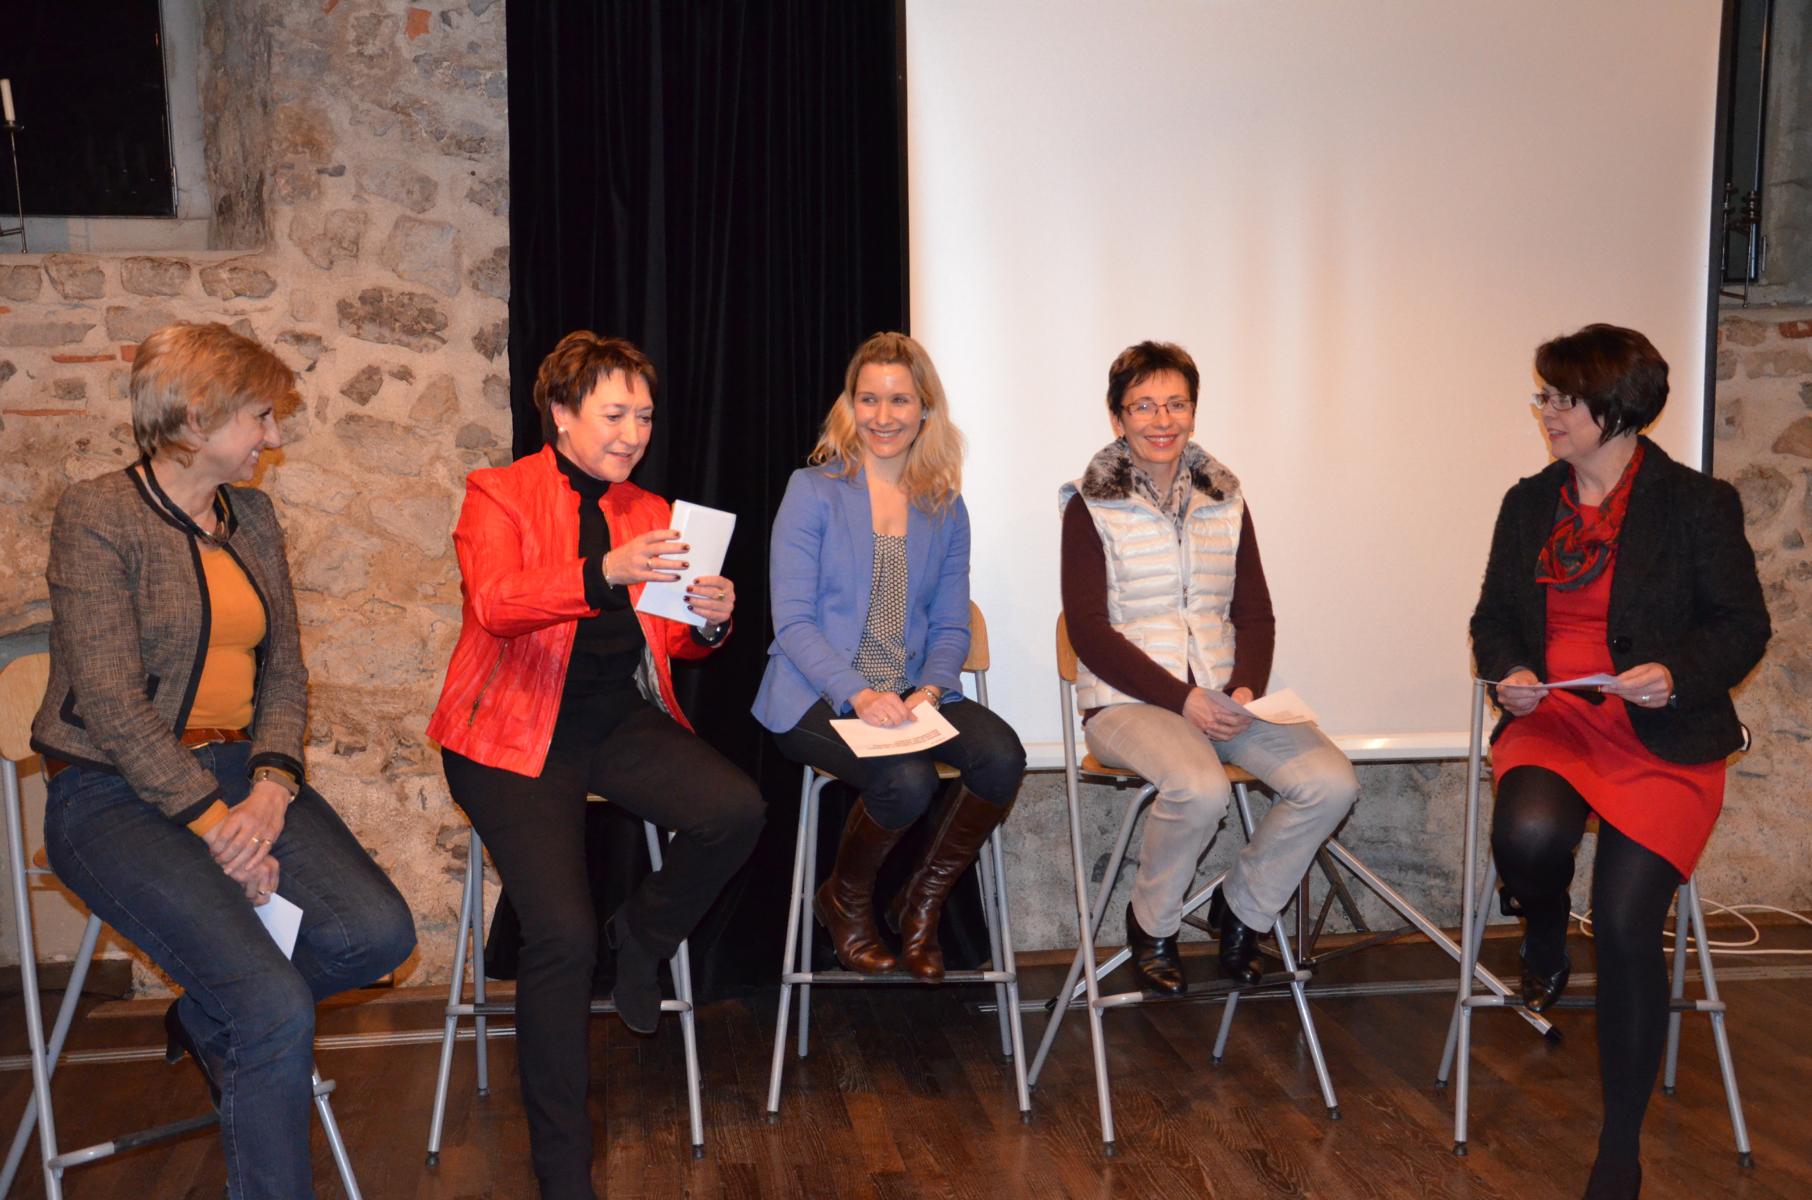 Podiumsdiskussion im Kloster in Horb